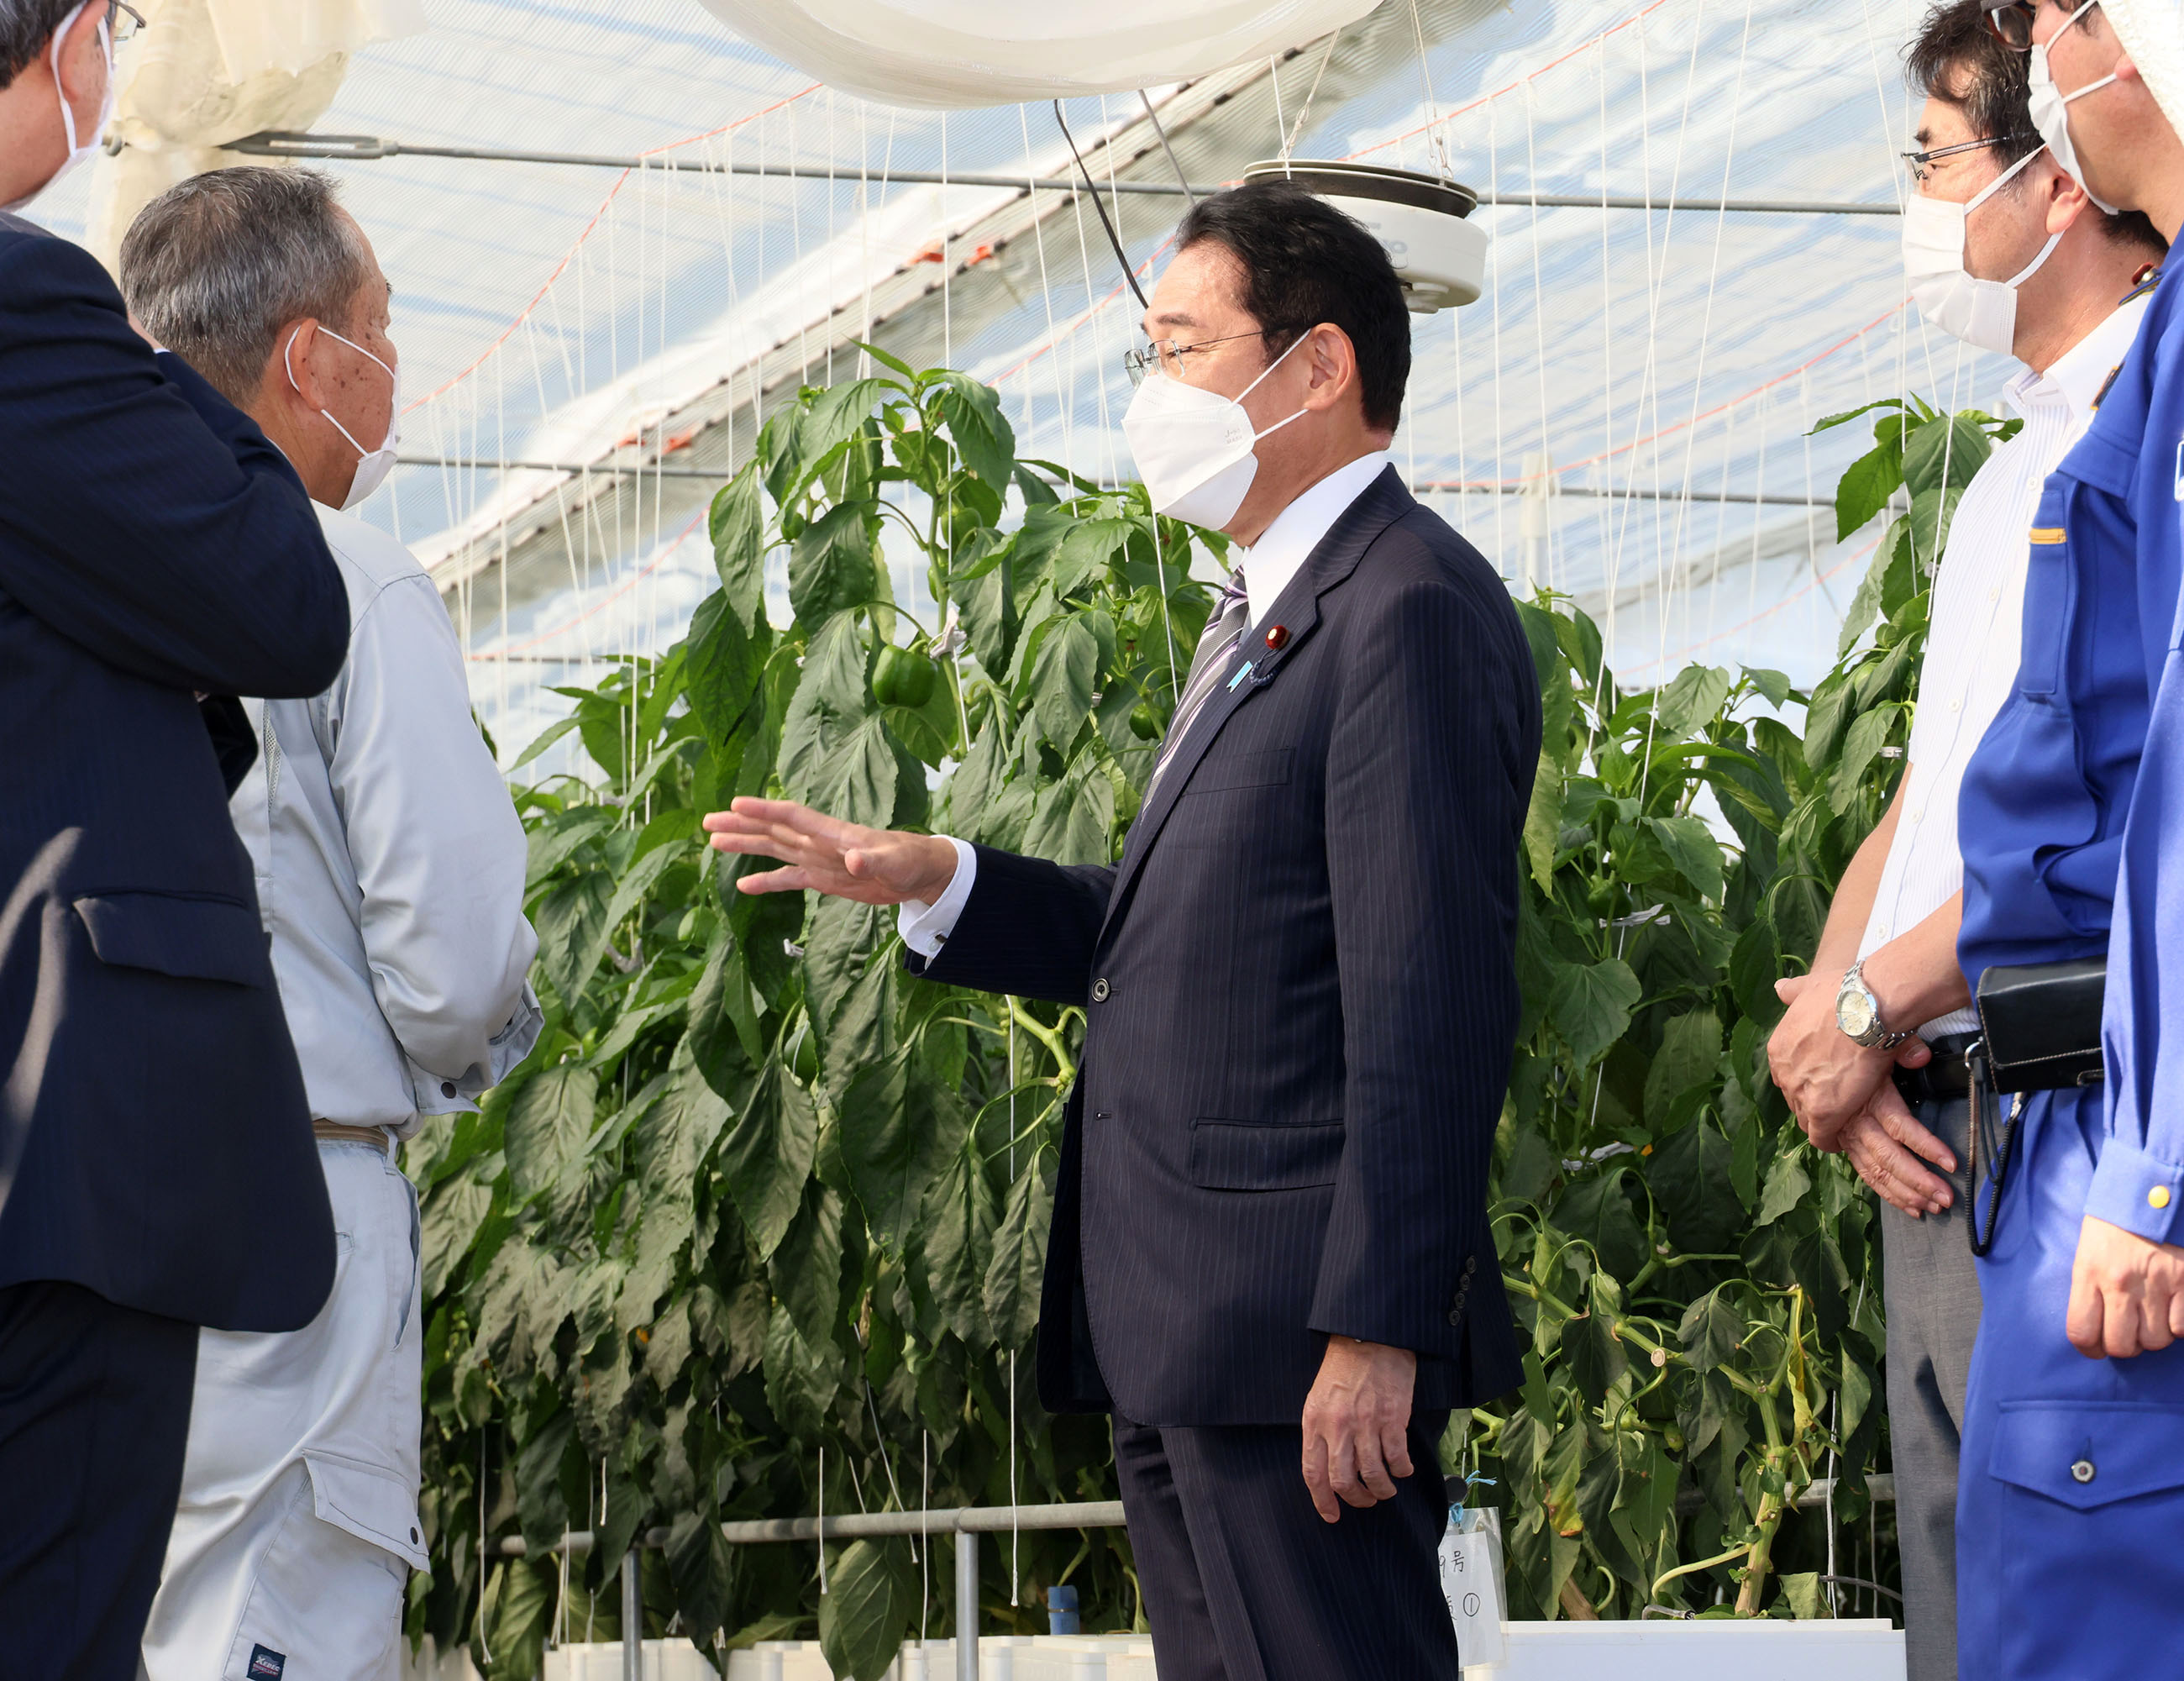 Photograph of the Prime Minister visiting an agricultural facility (1)